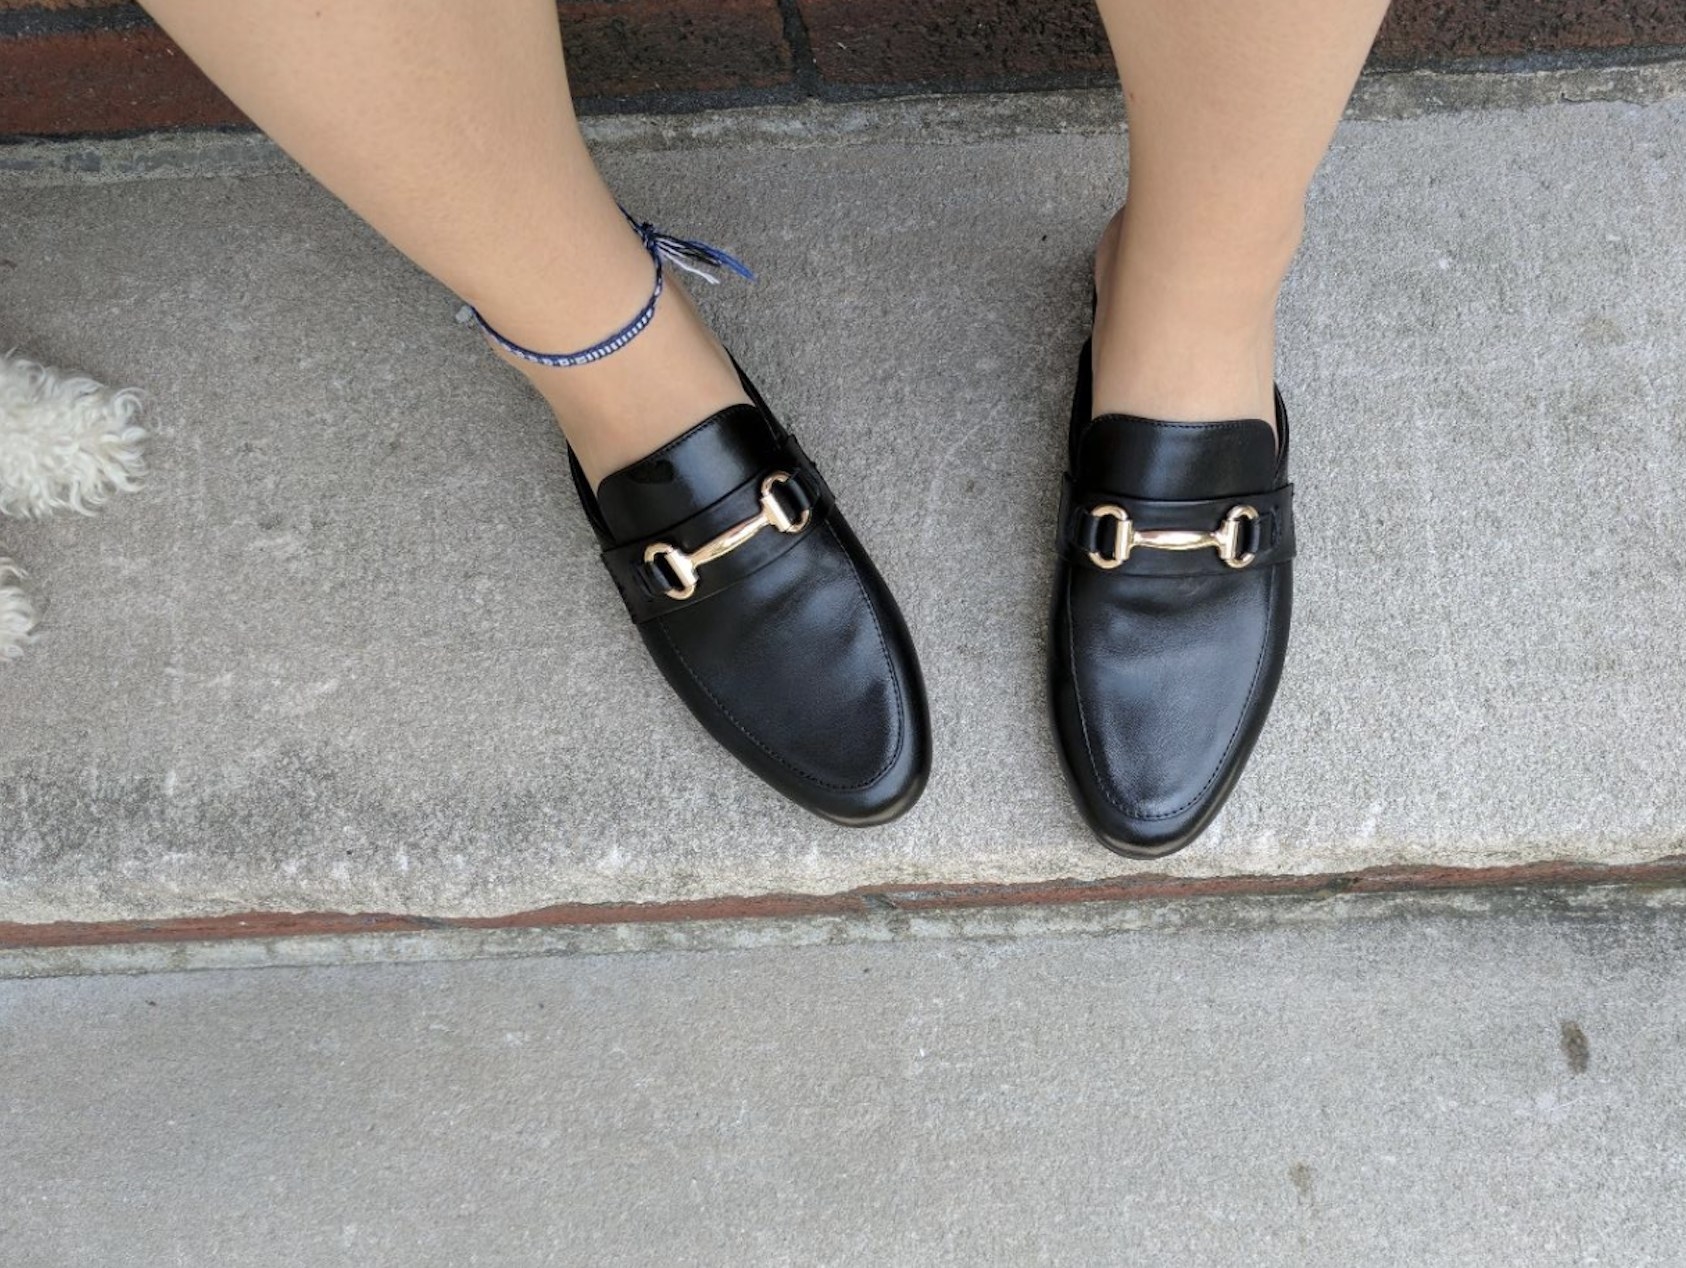 Black slip on loafers with a gold buckle on top